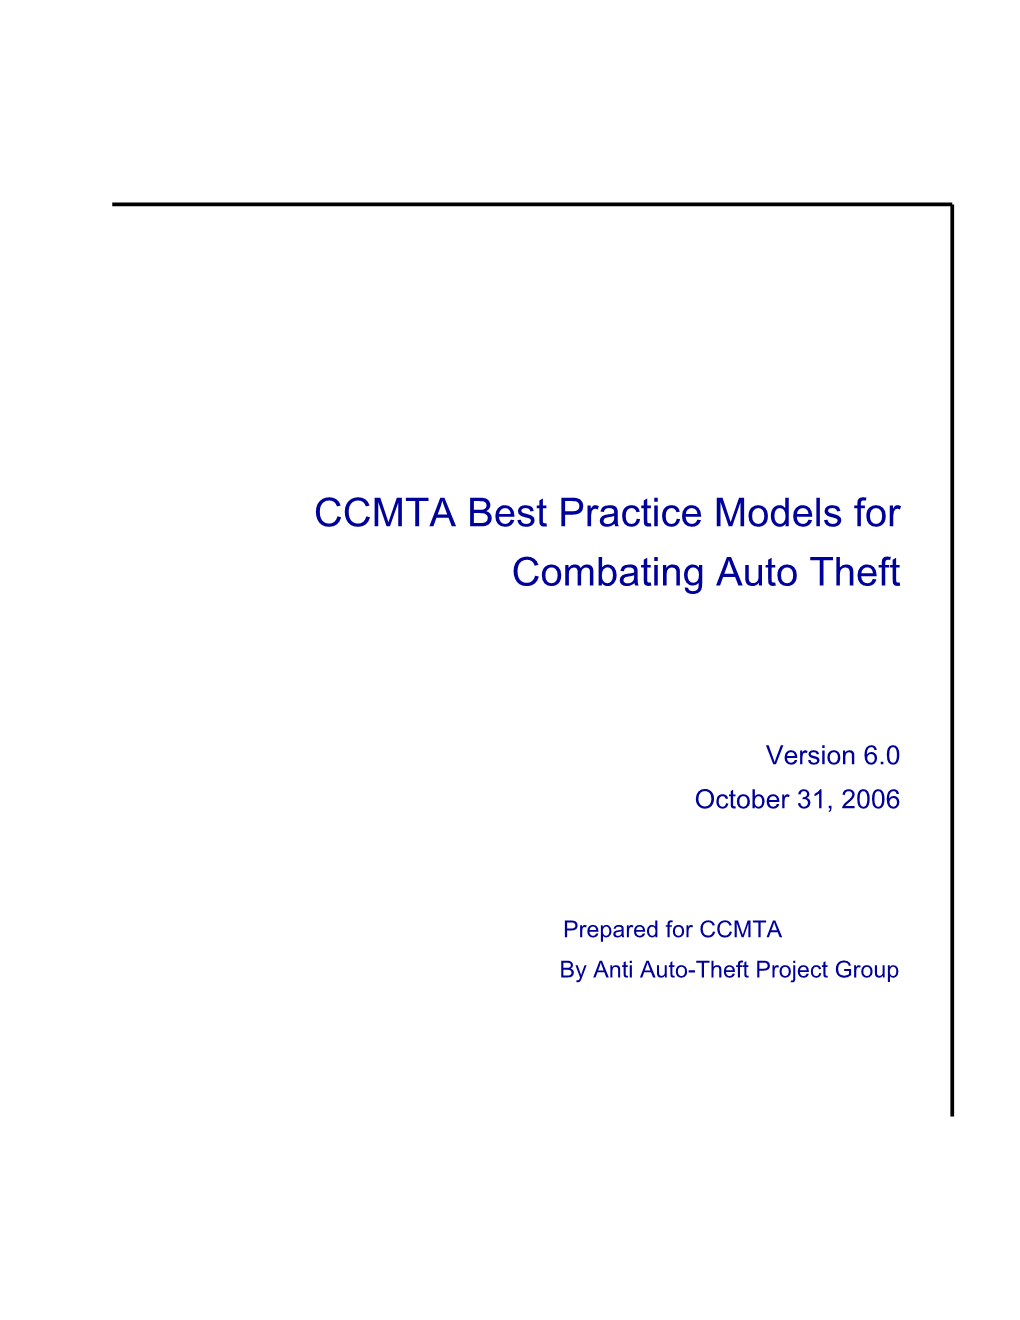 CCMTA Best Practice Models for Combating Auto Theft